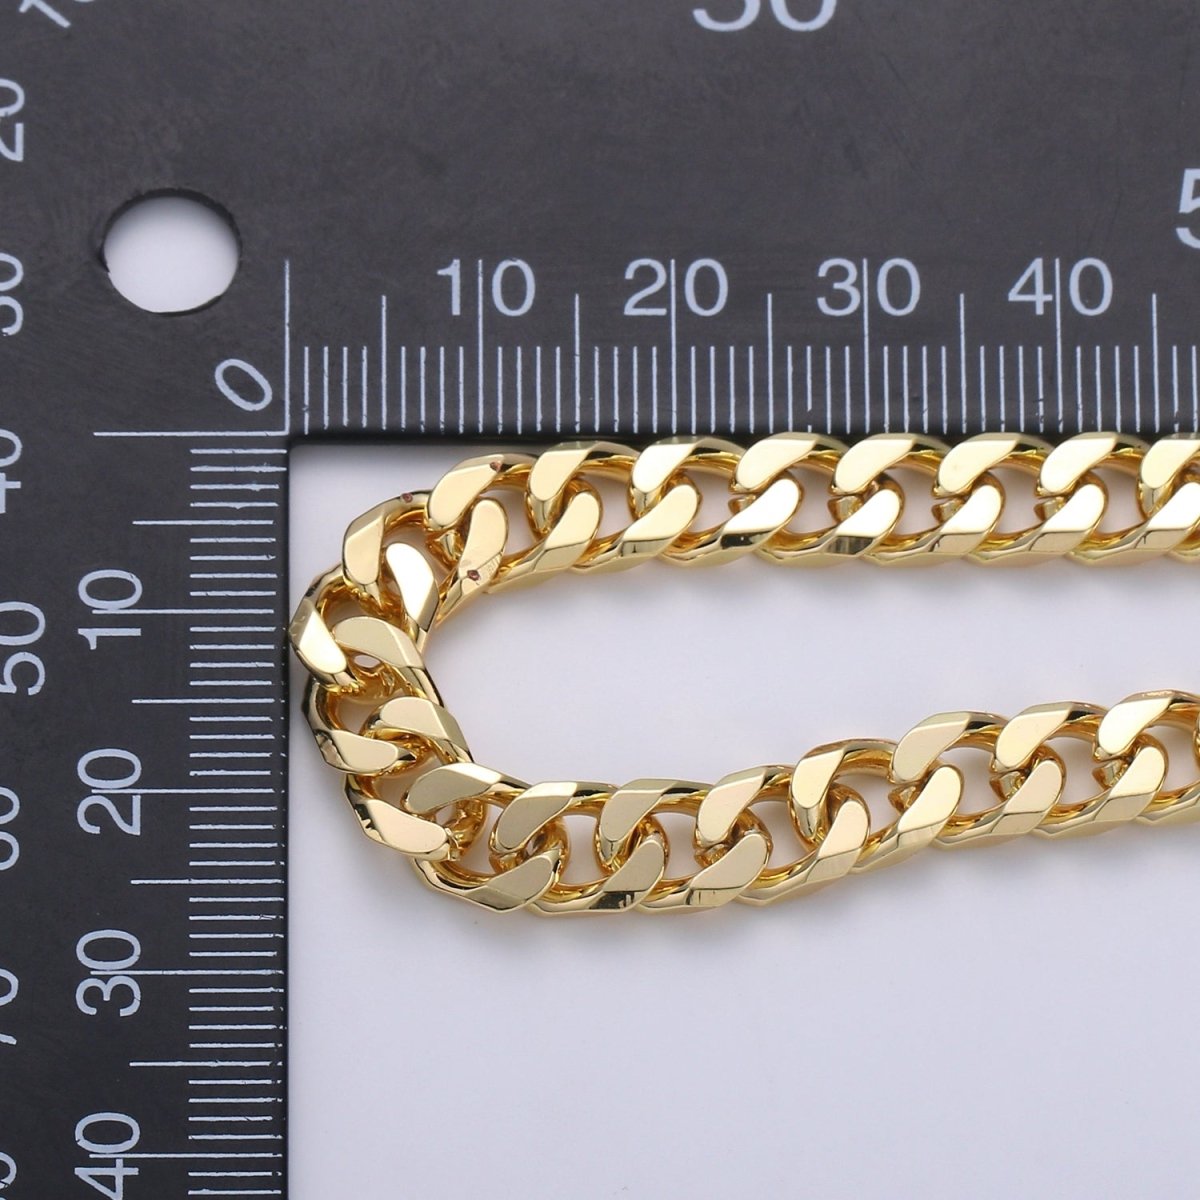 24K Gold Filled 9mm Cuban Curb Chain By Yard, Wholesale Bulk Roll Chain For Jewelry Making, Thickness 2mm | ROLL-305 Clearance Pricing - DLUXCA